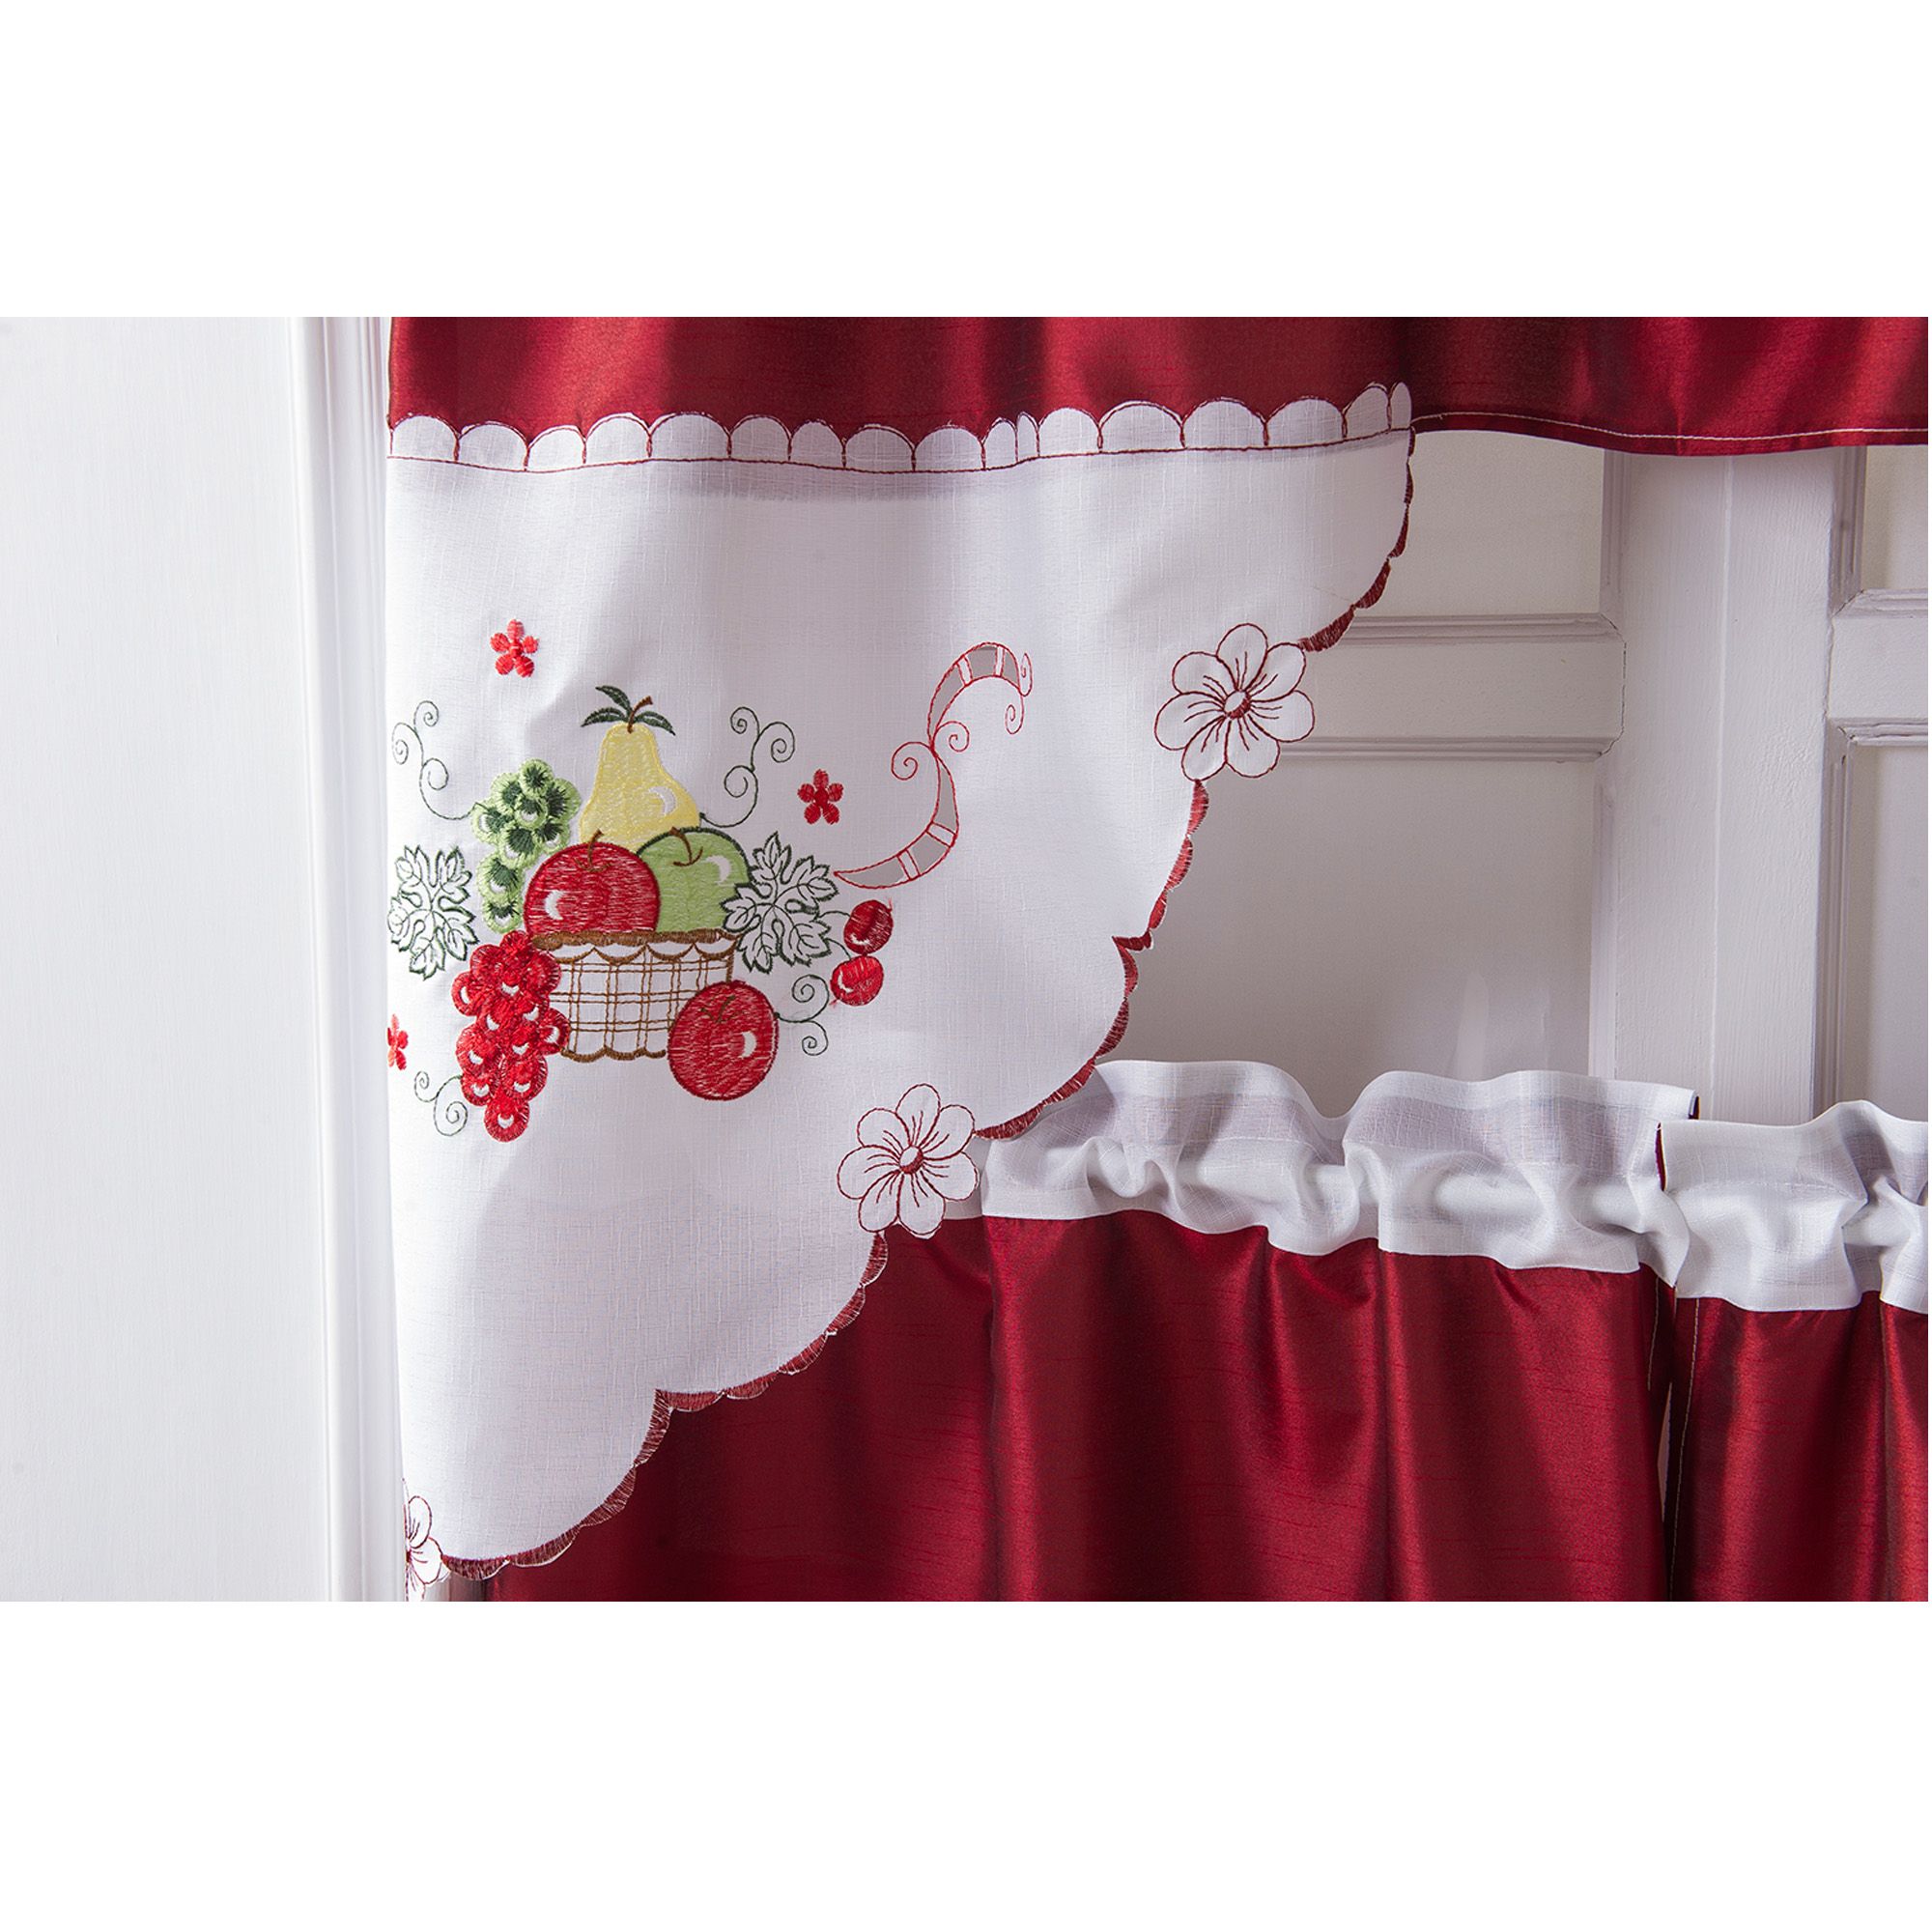 Details About Rt Designers Collection Vintage Tier & Swag Kitchen Curtain  Set – Multi Within Imperial Flower Jacquard Tier And Valance Kitchen Curtain Sets (View 6 of 20)